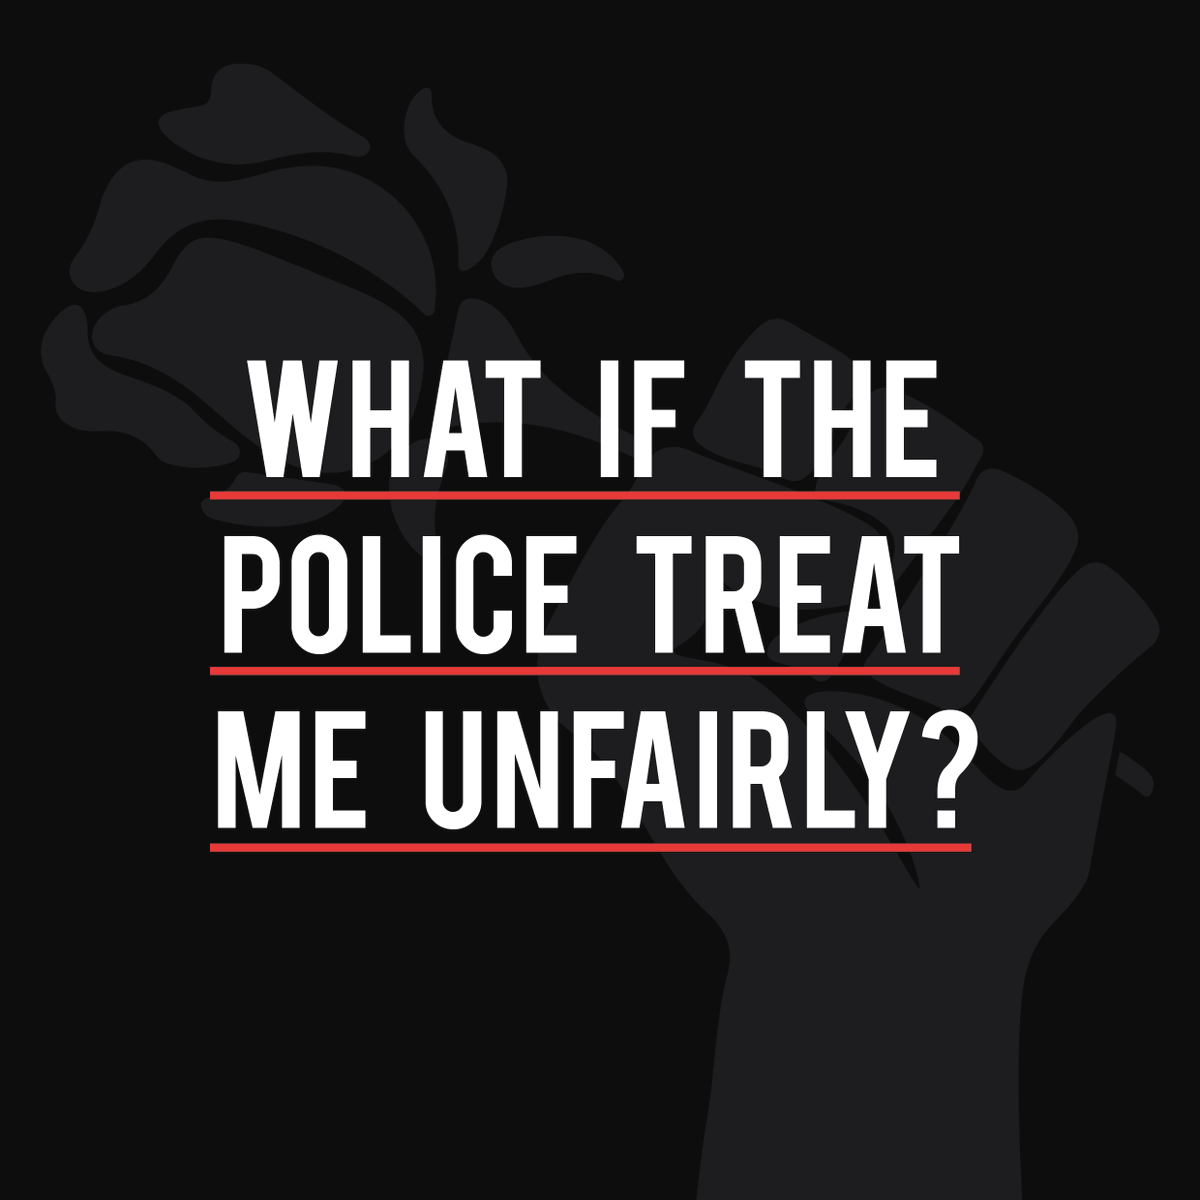 What if the Police treat me unfairly?Stay SAFE Stay Calm Ask for details Film or record Engage